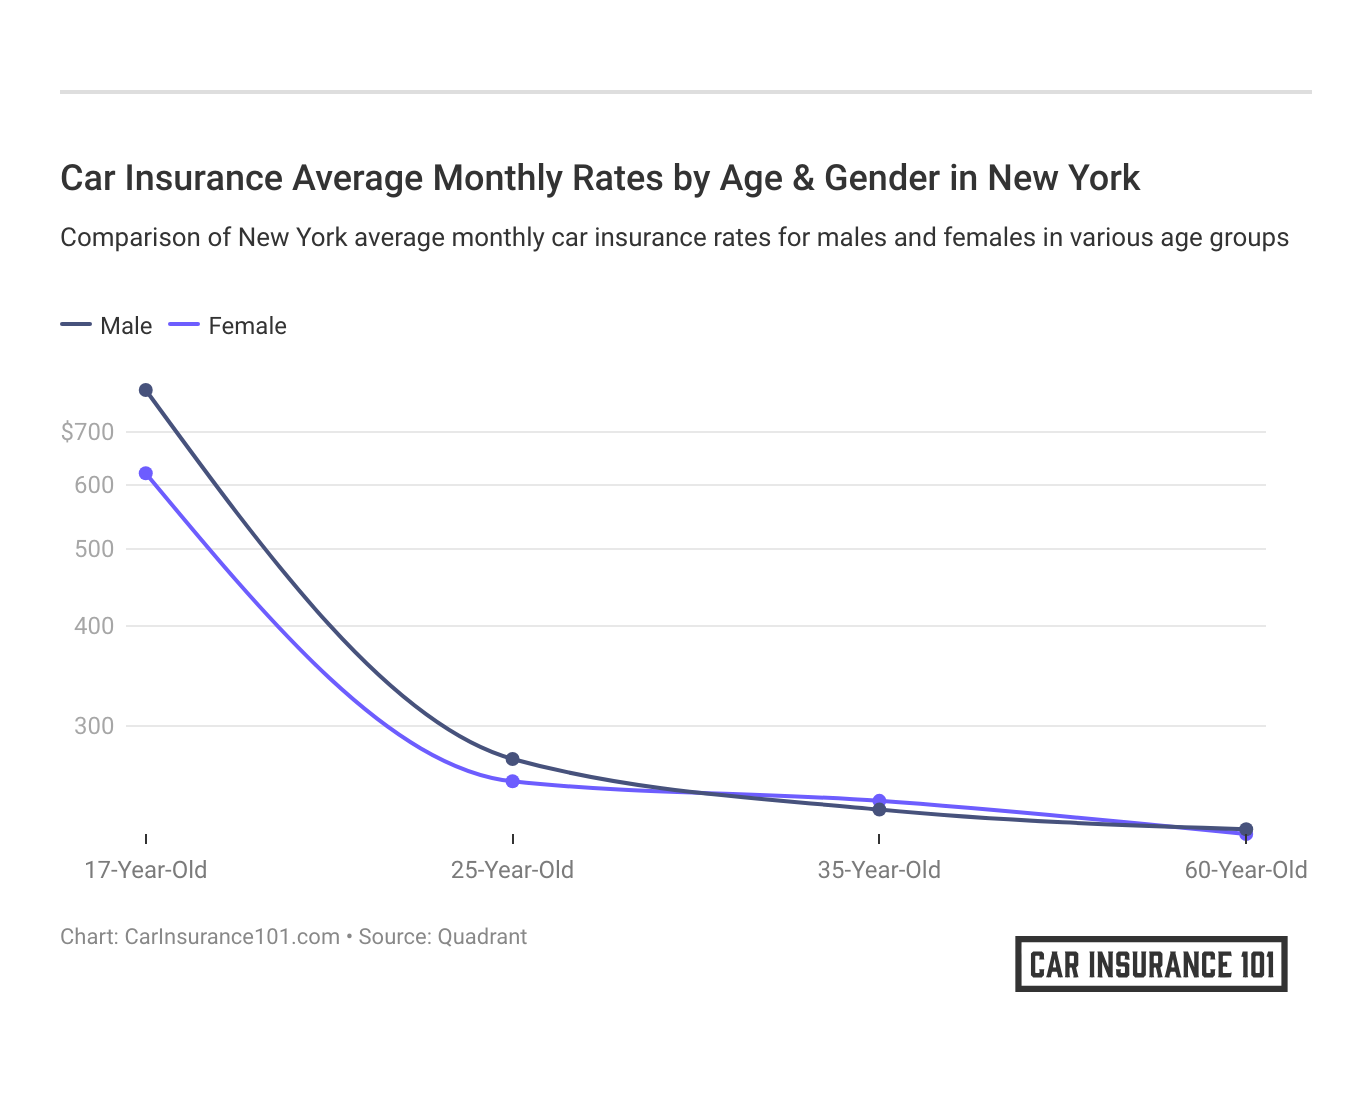 <h3>Car Insurance Average Monthly Rates by Age & Gender in New York</h3>